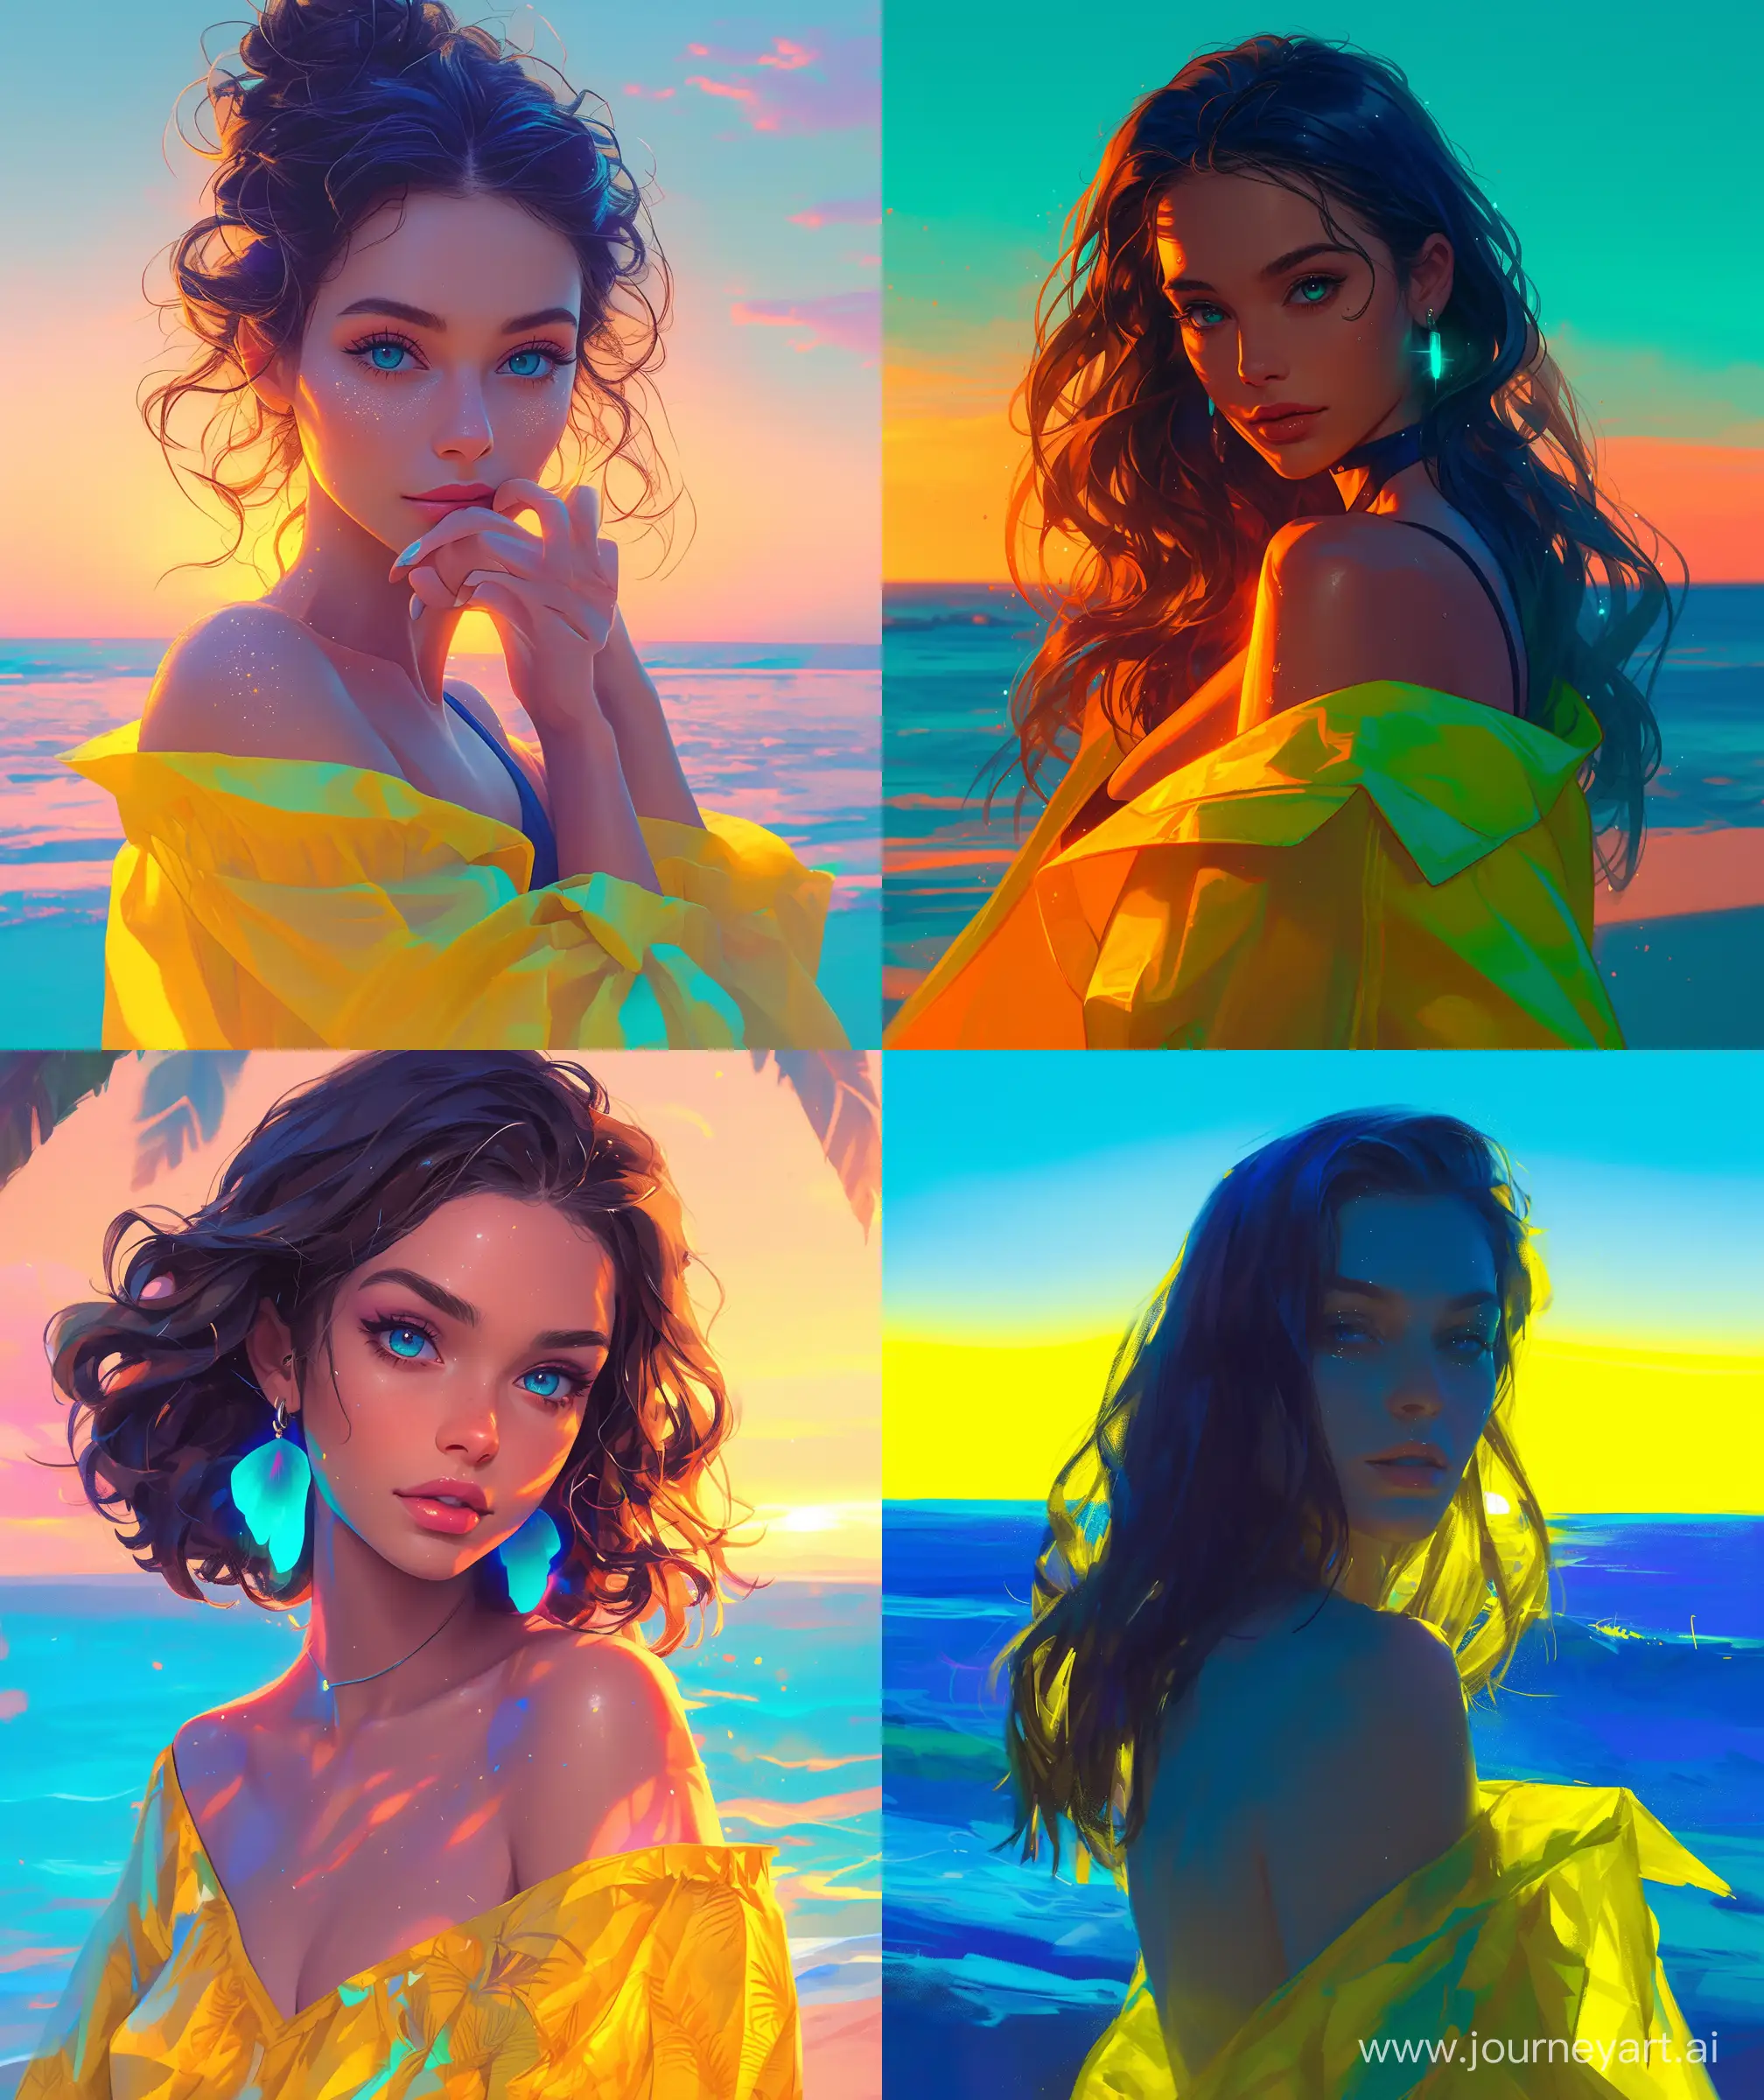 Romantic-Sunset-Embrace-Beautiful-Woman-in-Neon-Yellow-and-Aqua-Blue-Tropical-Paradise